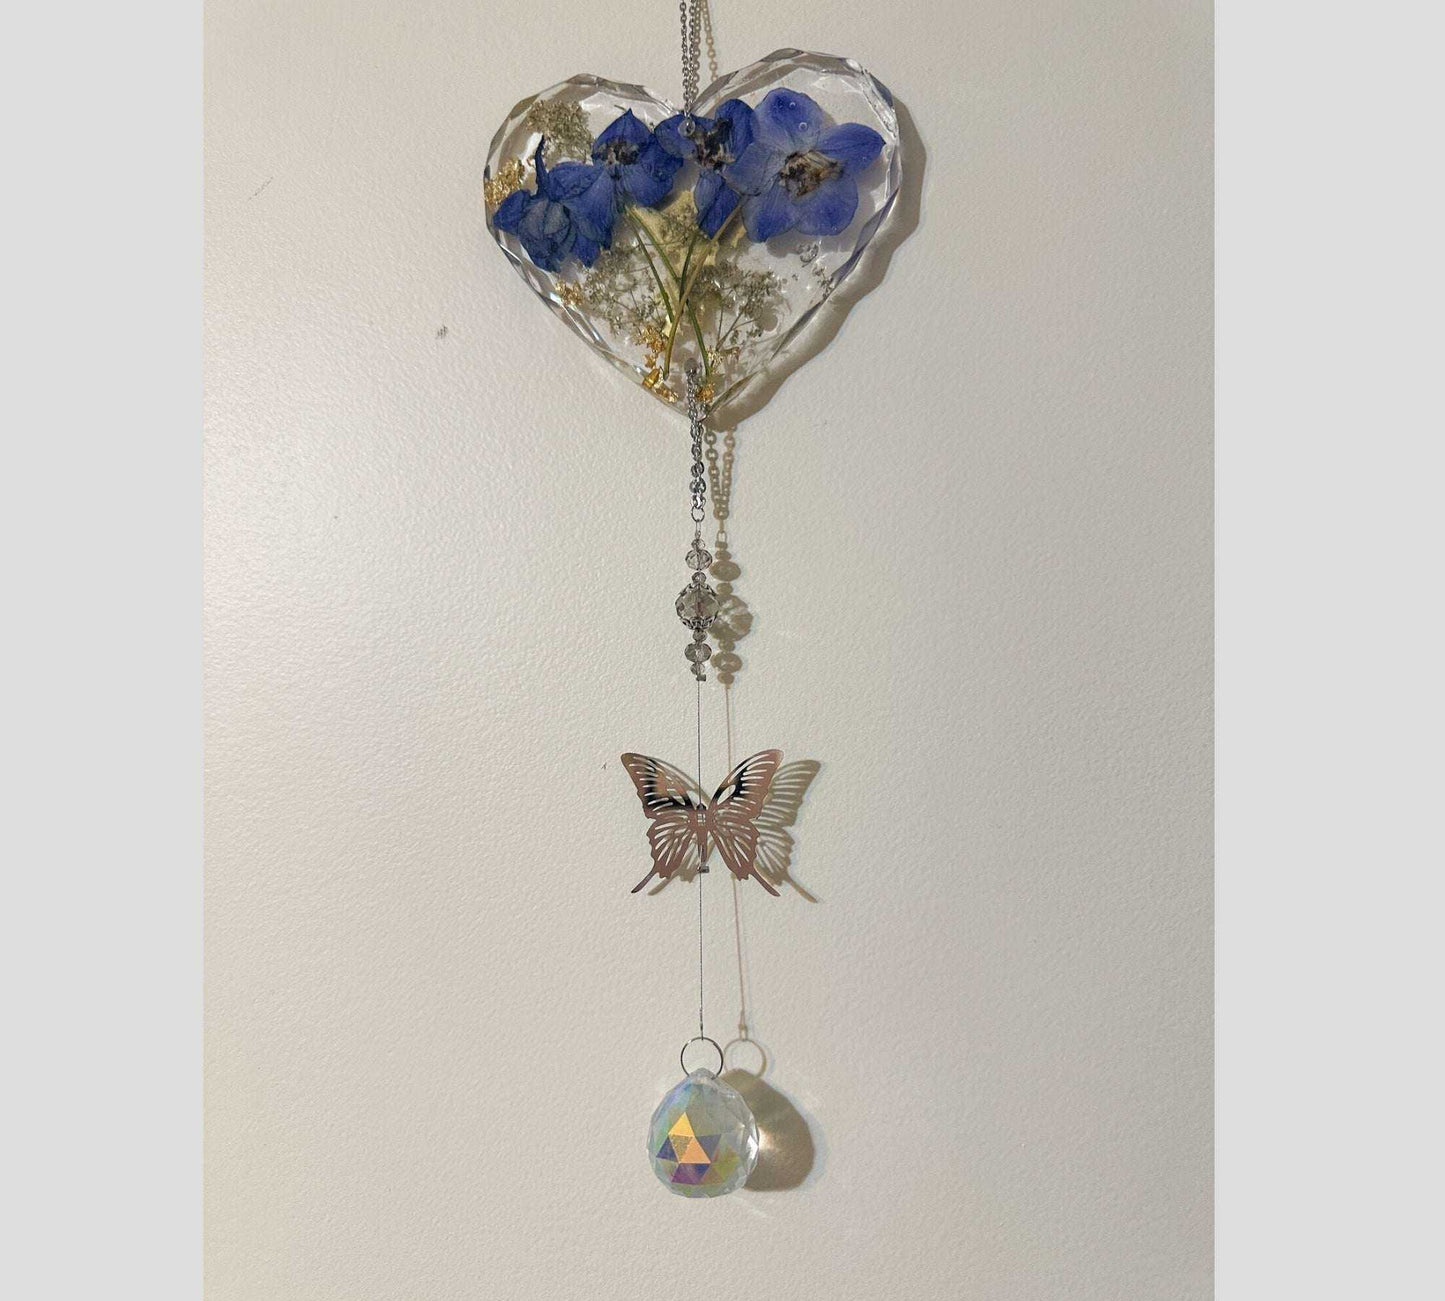 Floral Dreams Heart Suncatcher: Handcrafted Resin Botanical Window Charm